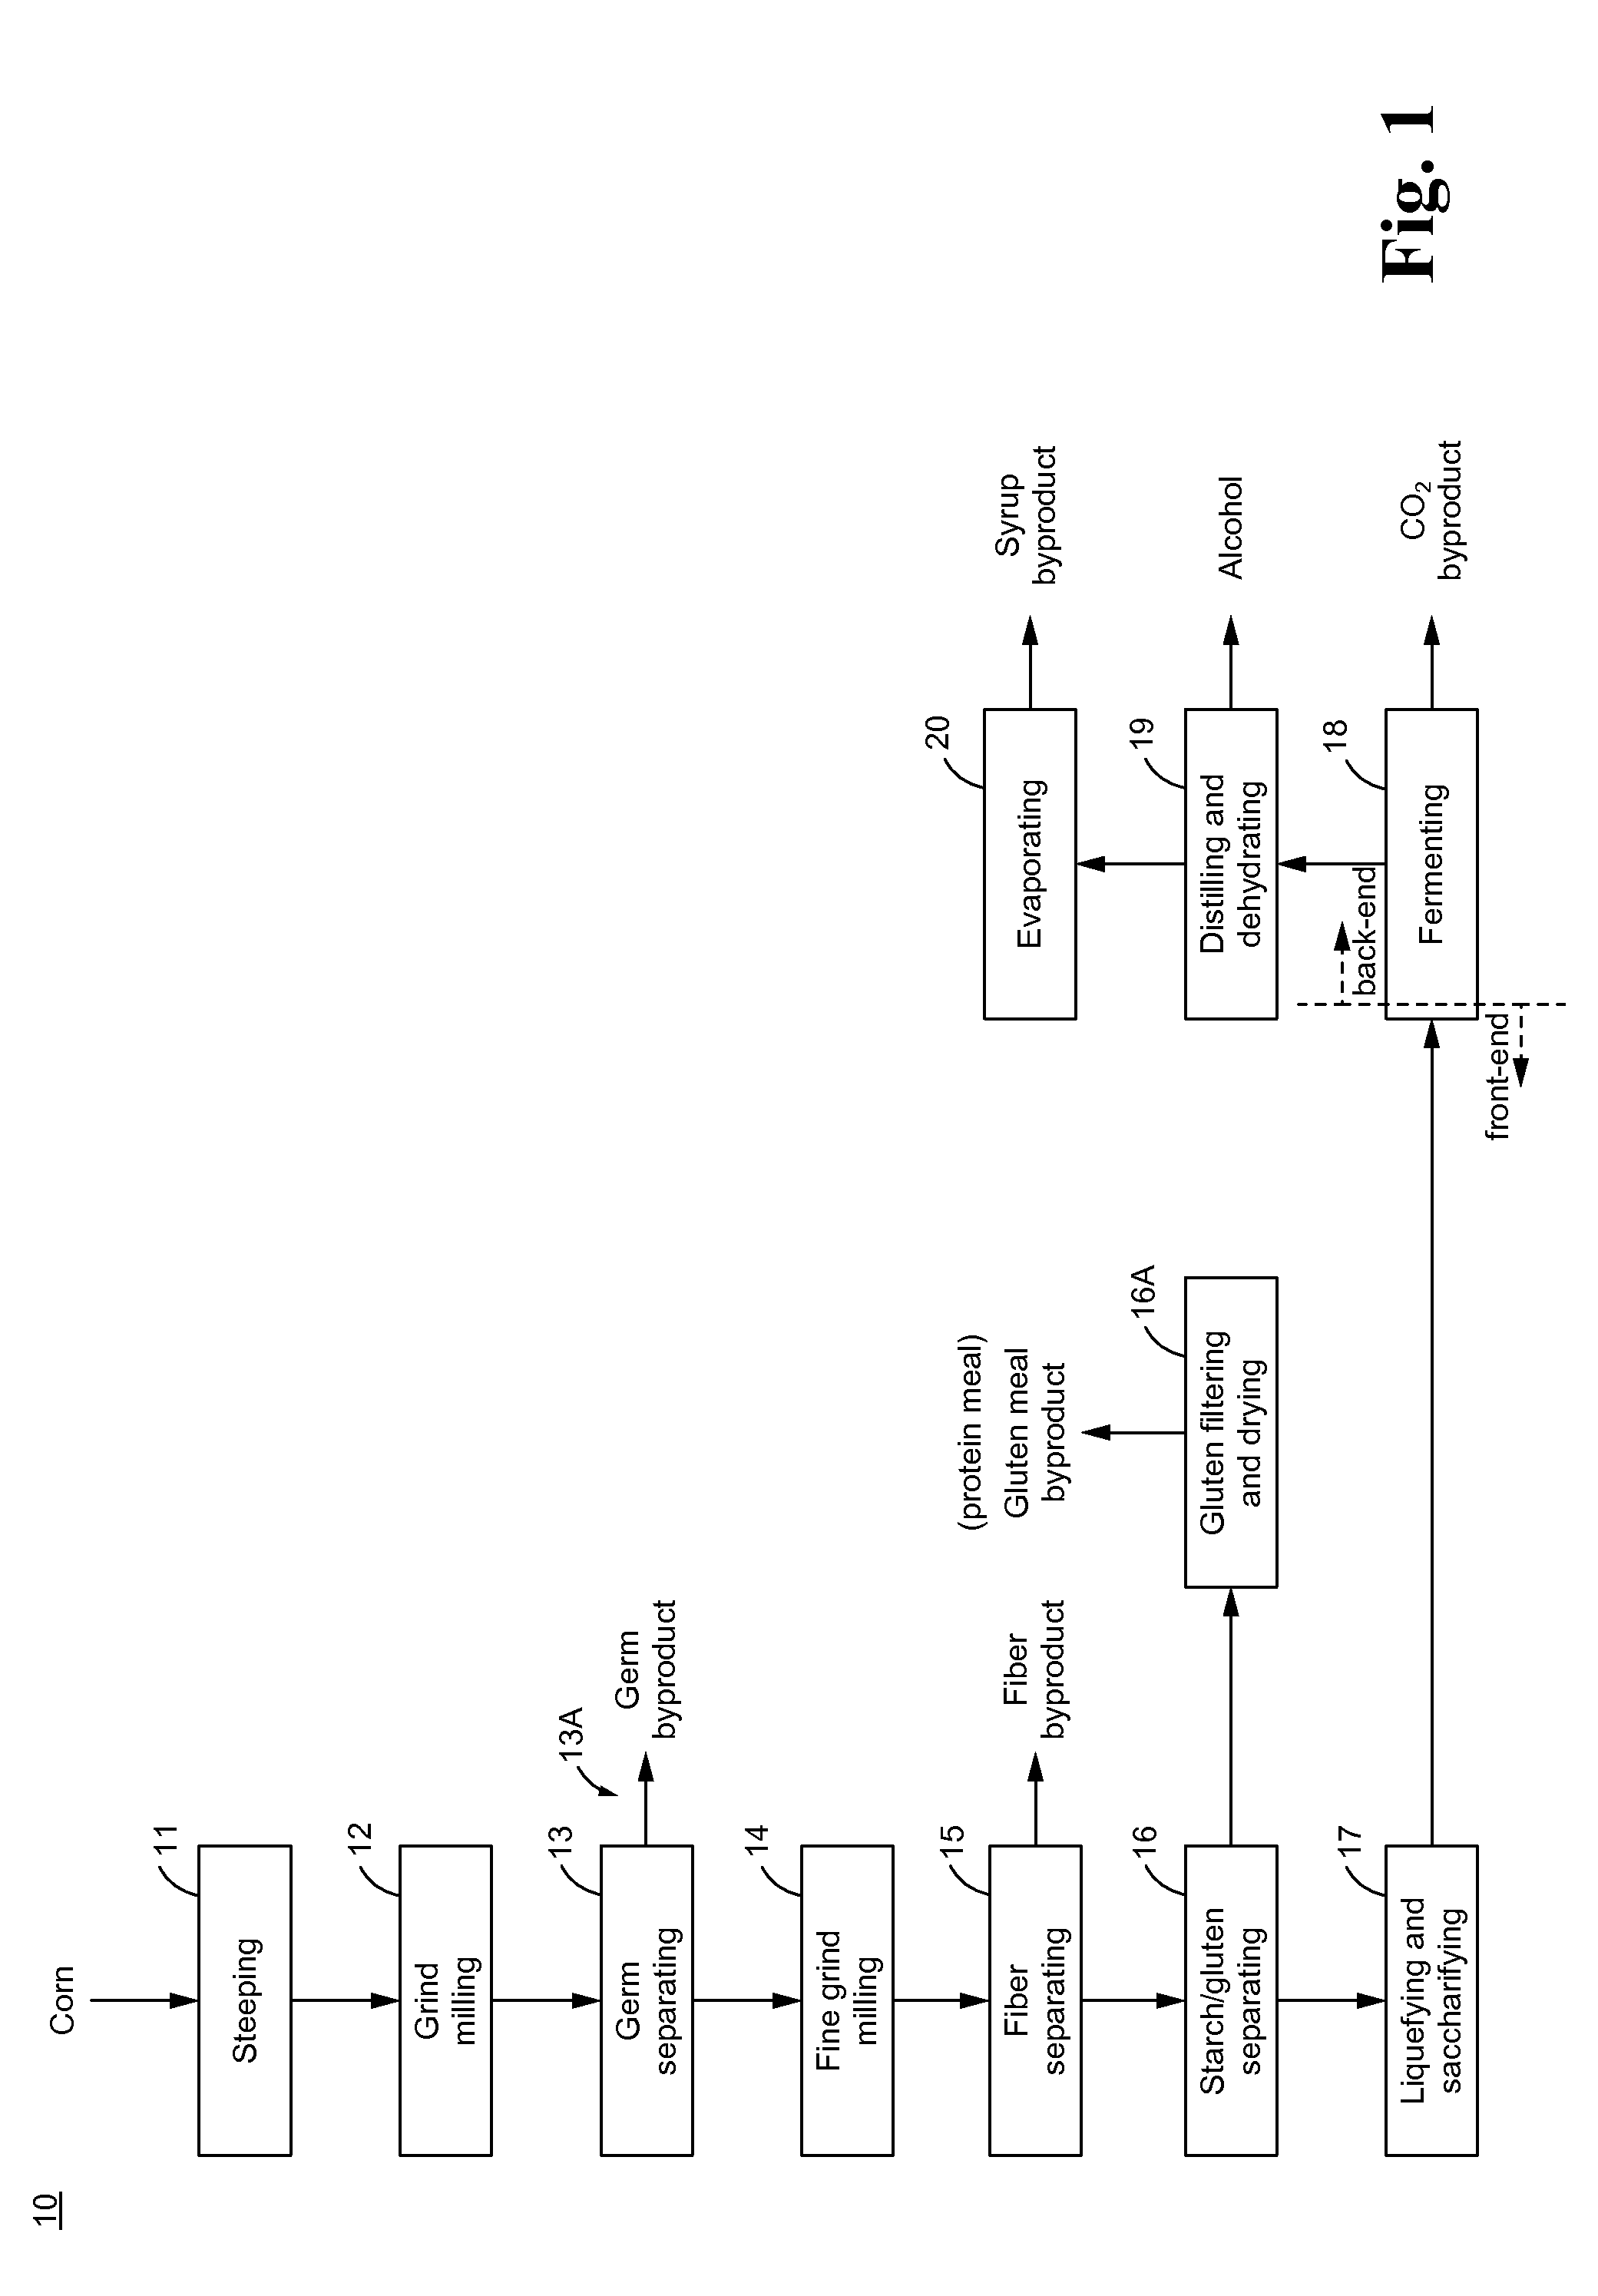 Method of and system for producing oil and valuable byproducts from grains in dry milling systems with a back-end dewater milling unit